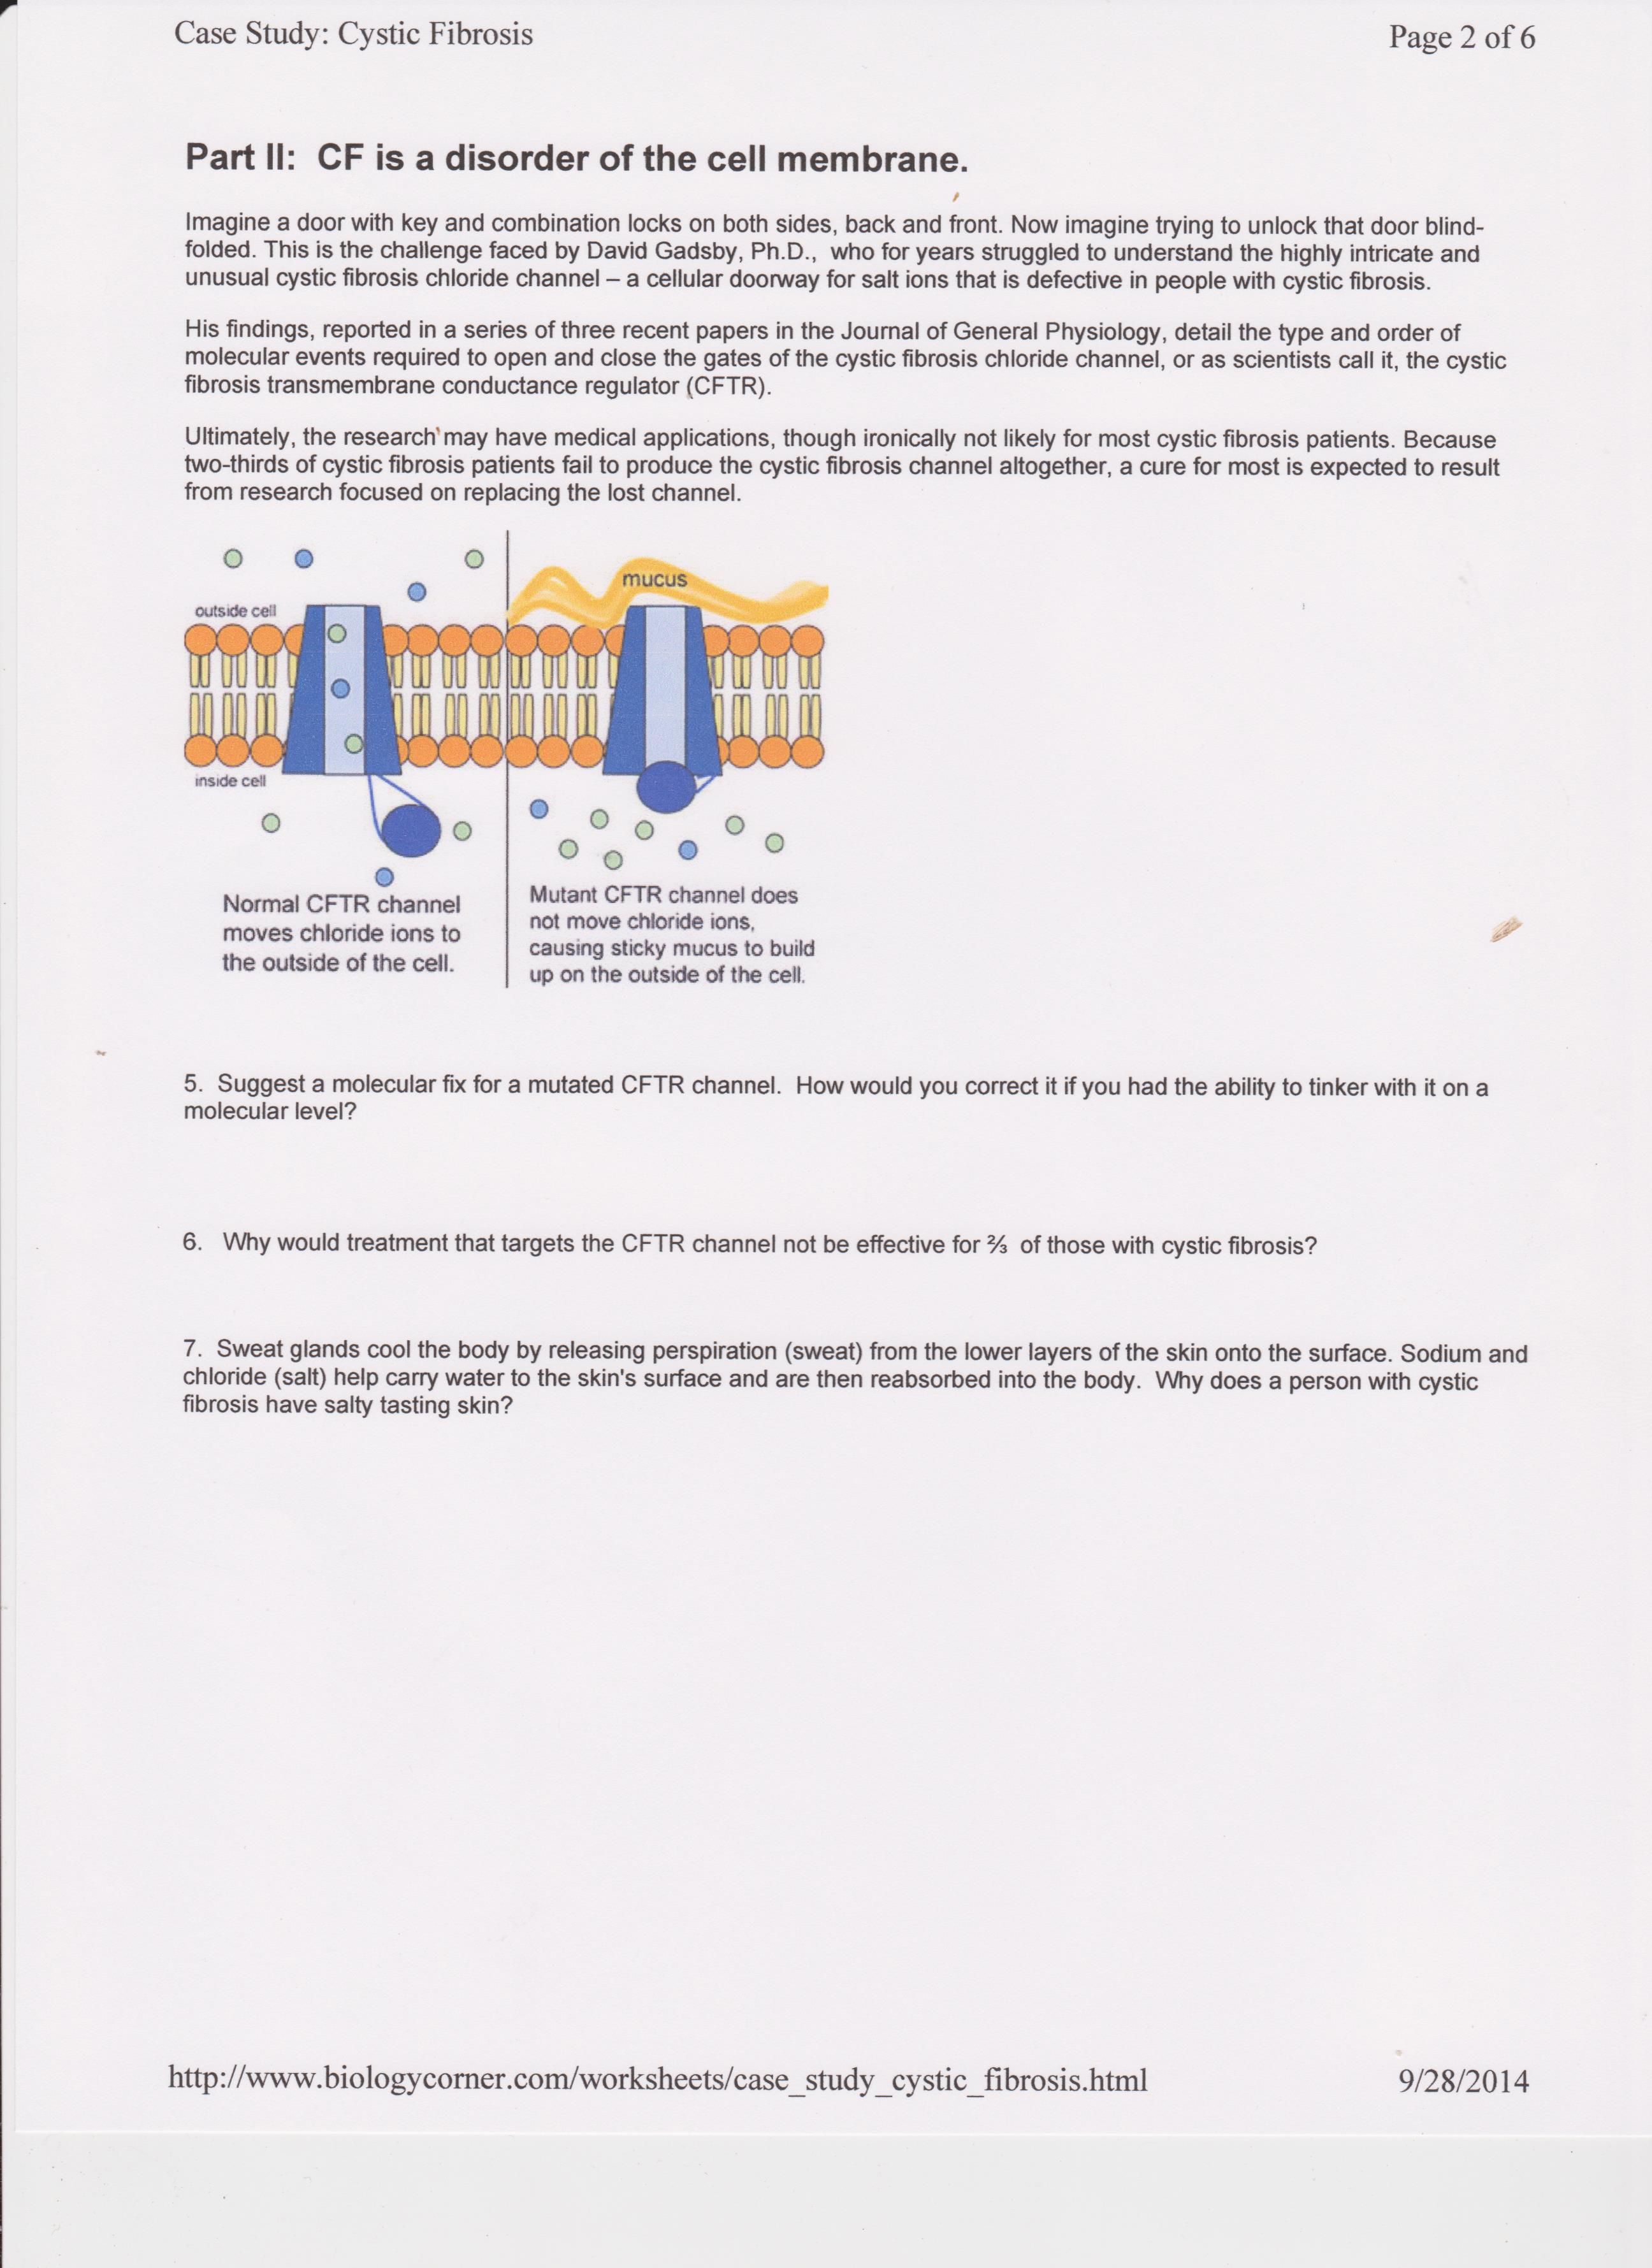 case study cystic fibrosis worksheet answers